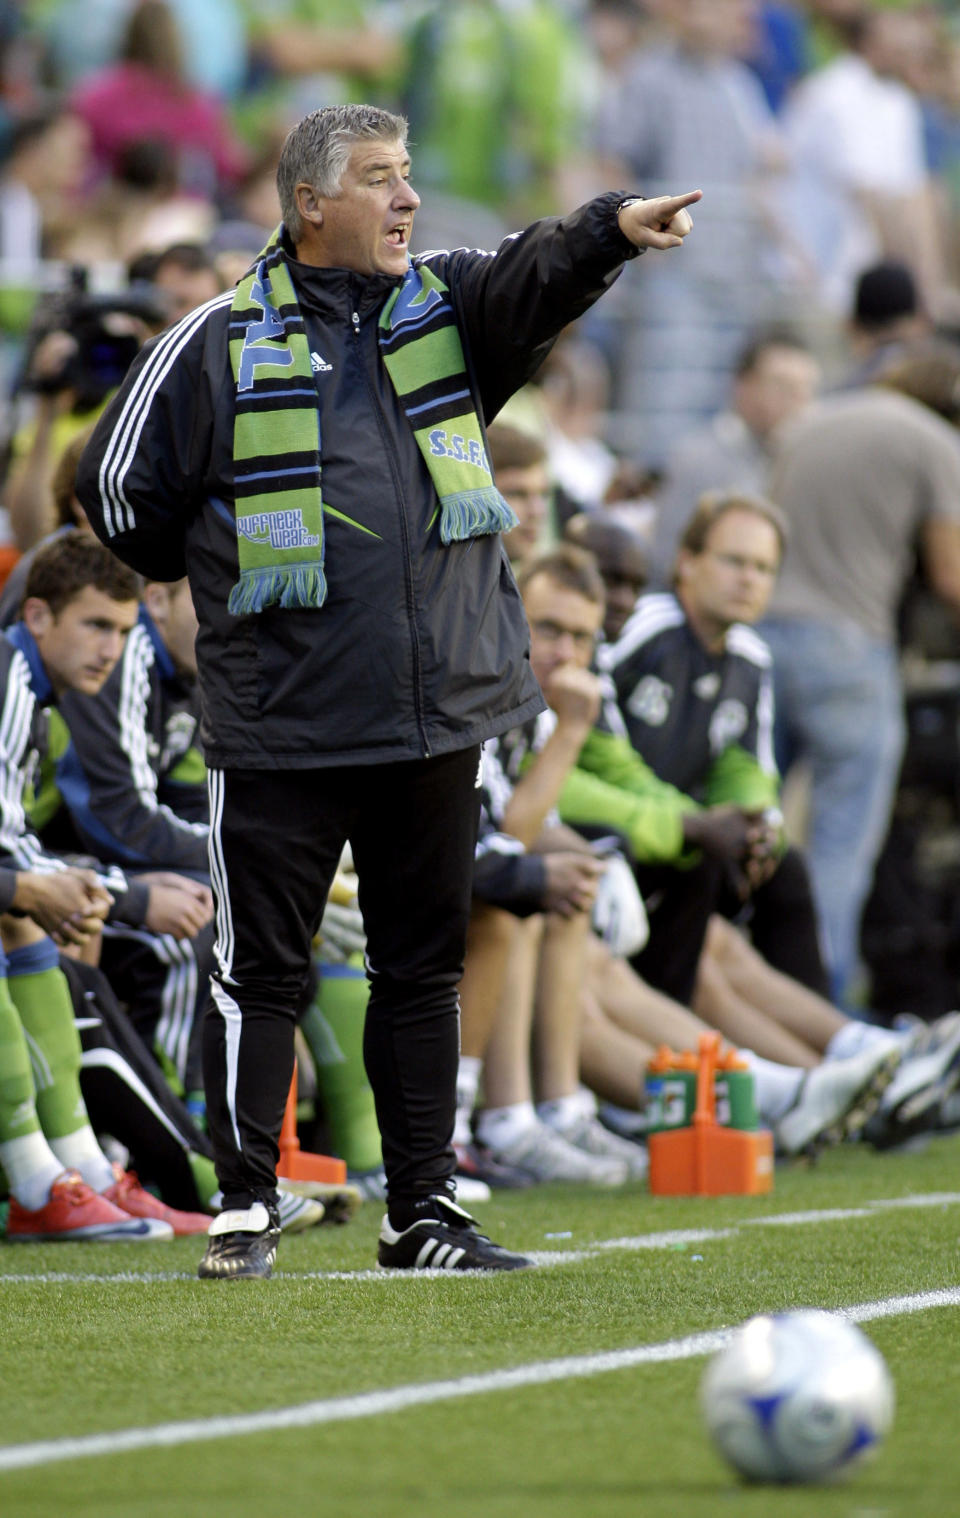 FILE - In this May 30, 2009, file photo, Seattle Sounders coach Sigi Schmid gestures from the sideline during the first half against the Columbus Crew in a MLS soccer match in Seattle. The match was Schmid's first against the Crew since he left the team at the end of the 2008 season to coach the Sounders. Schmid, the winningest coach in MLS history, has died. He was 65. Schmid's family said he died Tuesday, Dec. 25, 2018, at Ronald Reagan UCLA Medical Center in Los Angeles. Schmid was hospitalized three weeks ago as he awaited a heart transplant. (AP Photo/Ted S. Warren, File)